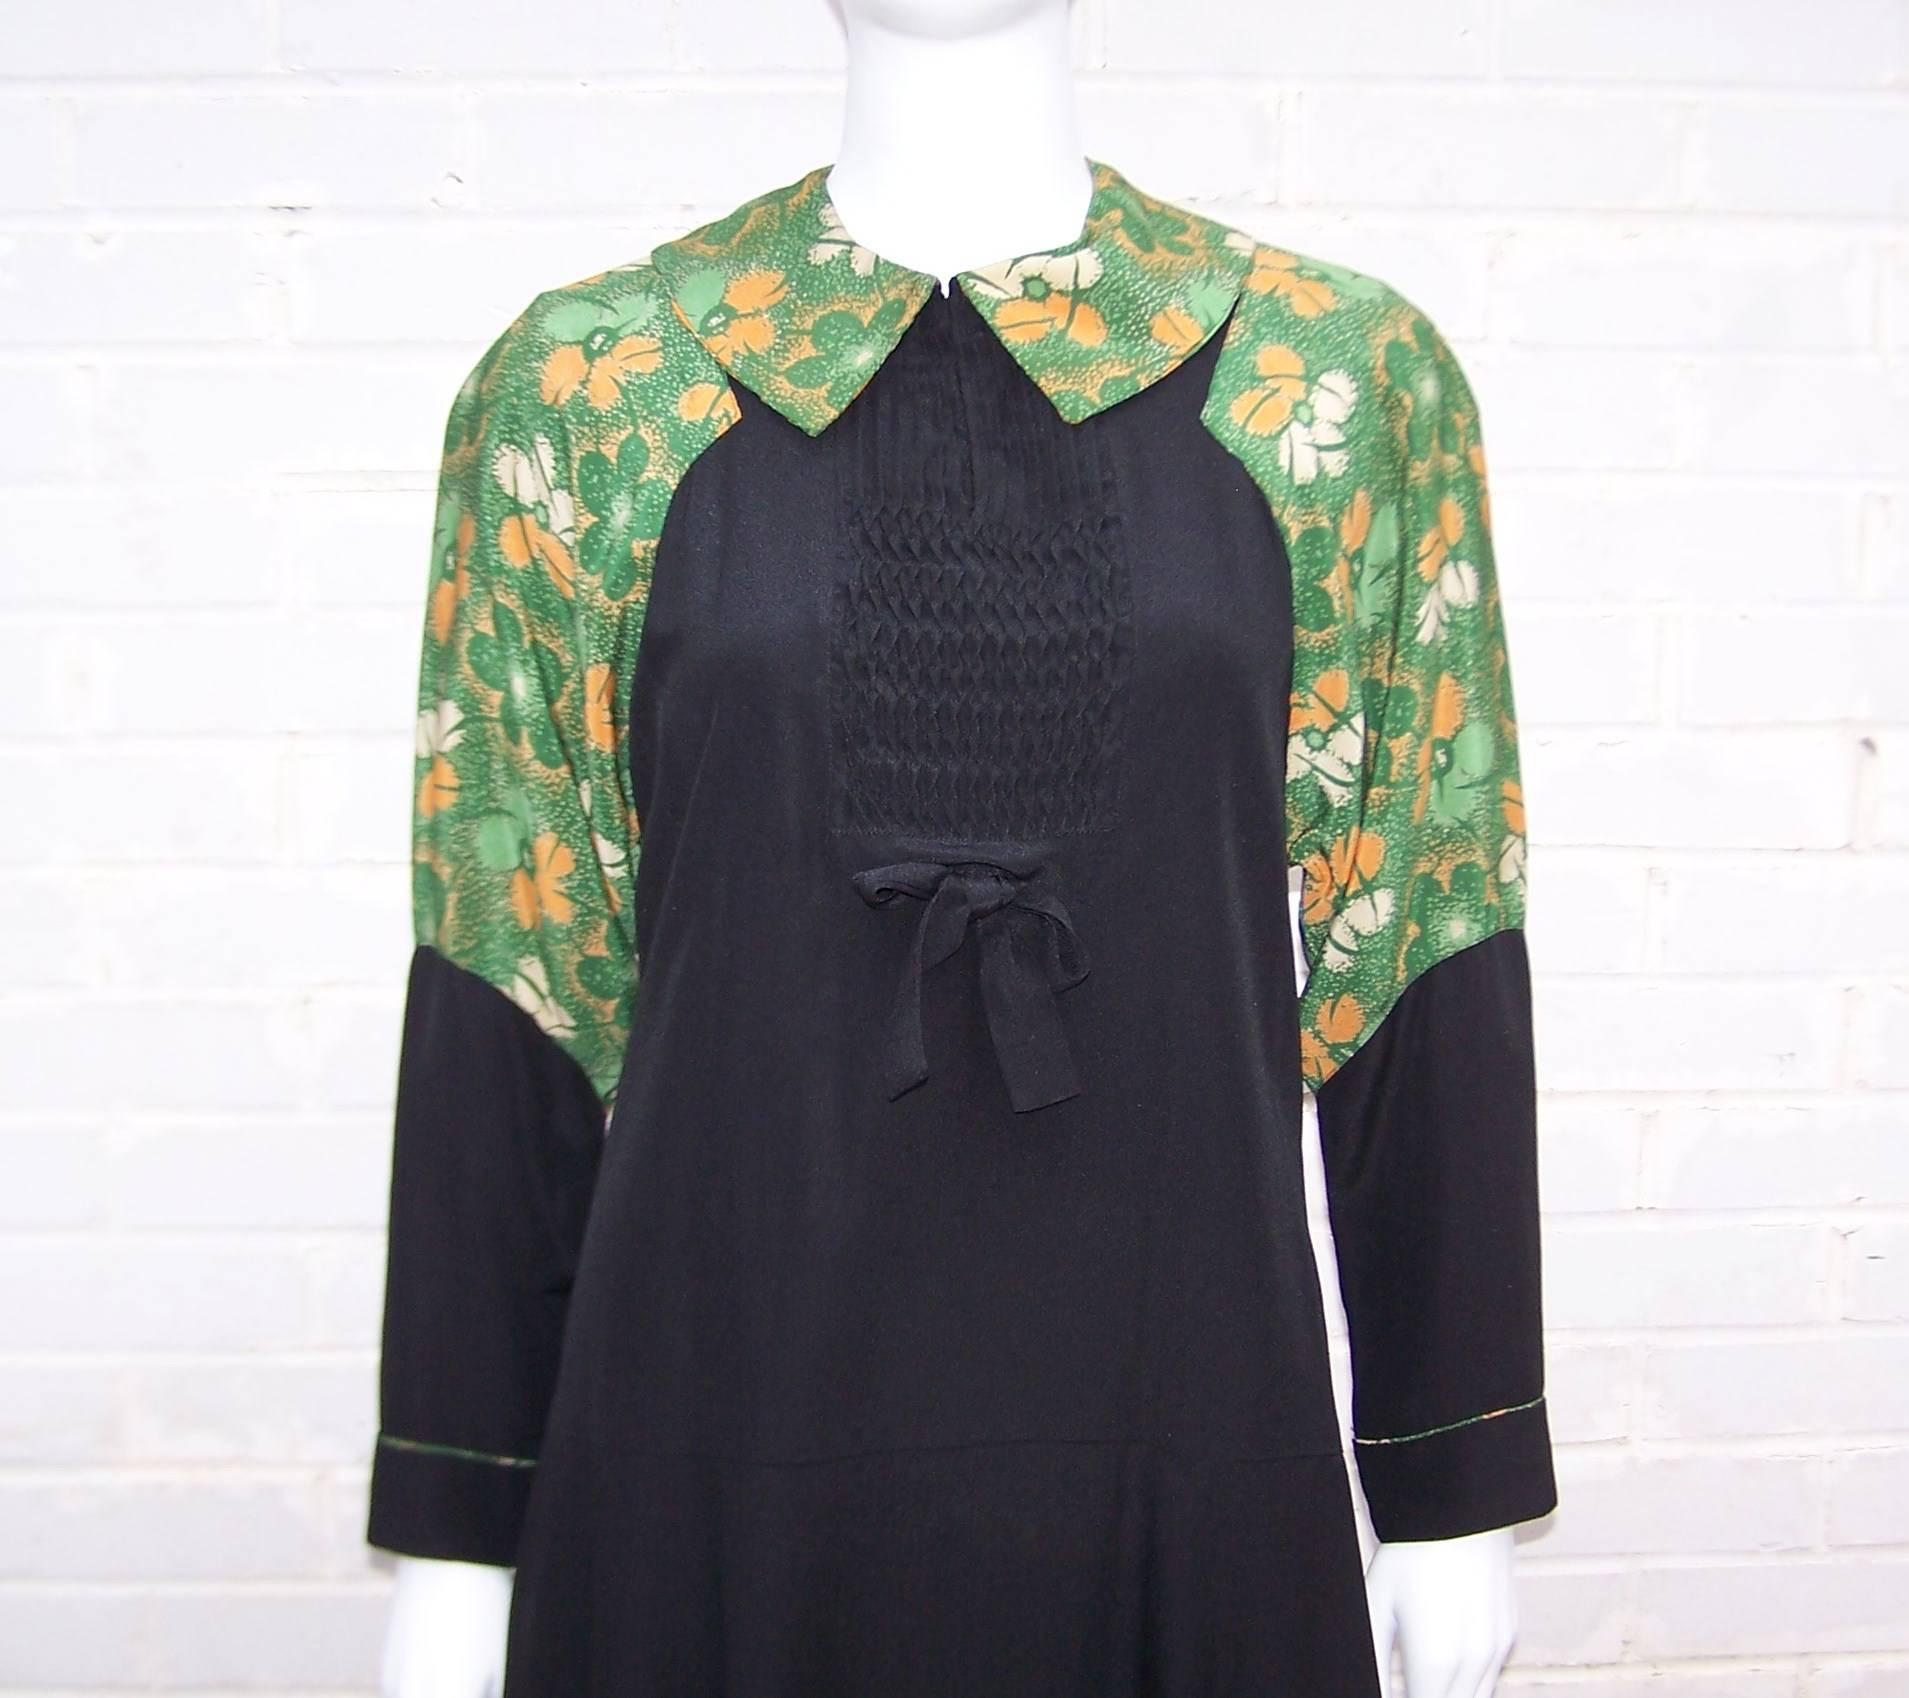 1920's Black Day Dress With Green Floral Bodice & Intricate Pin Tucking 1